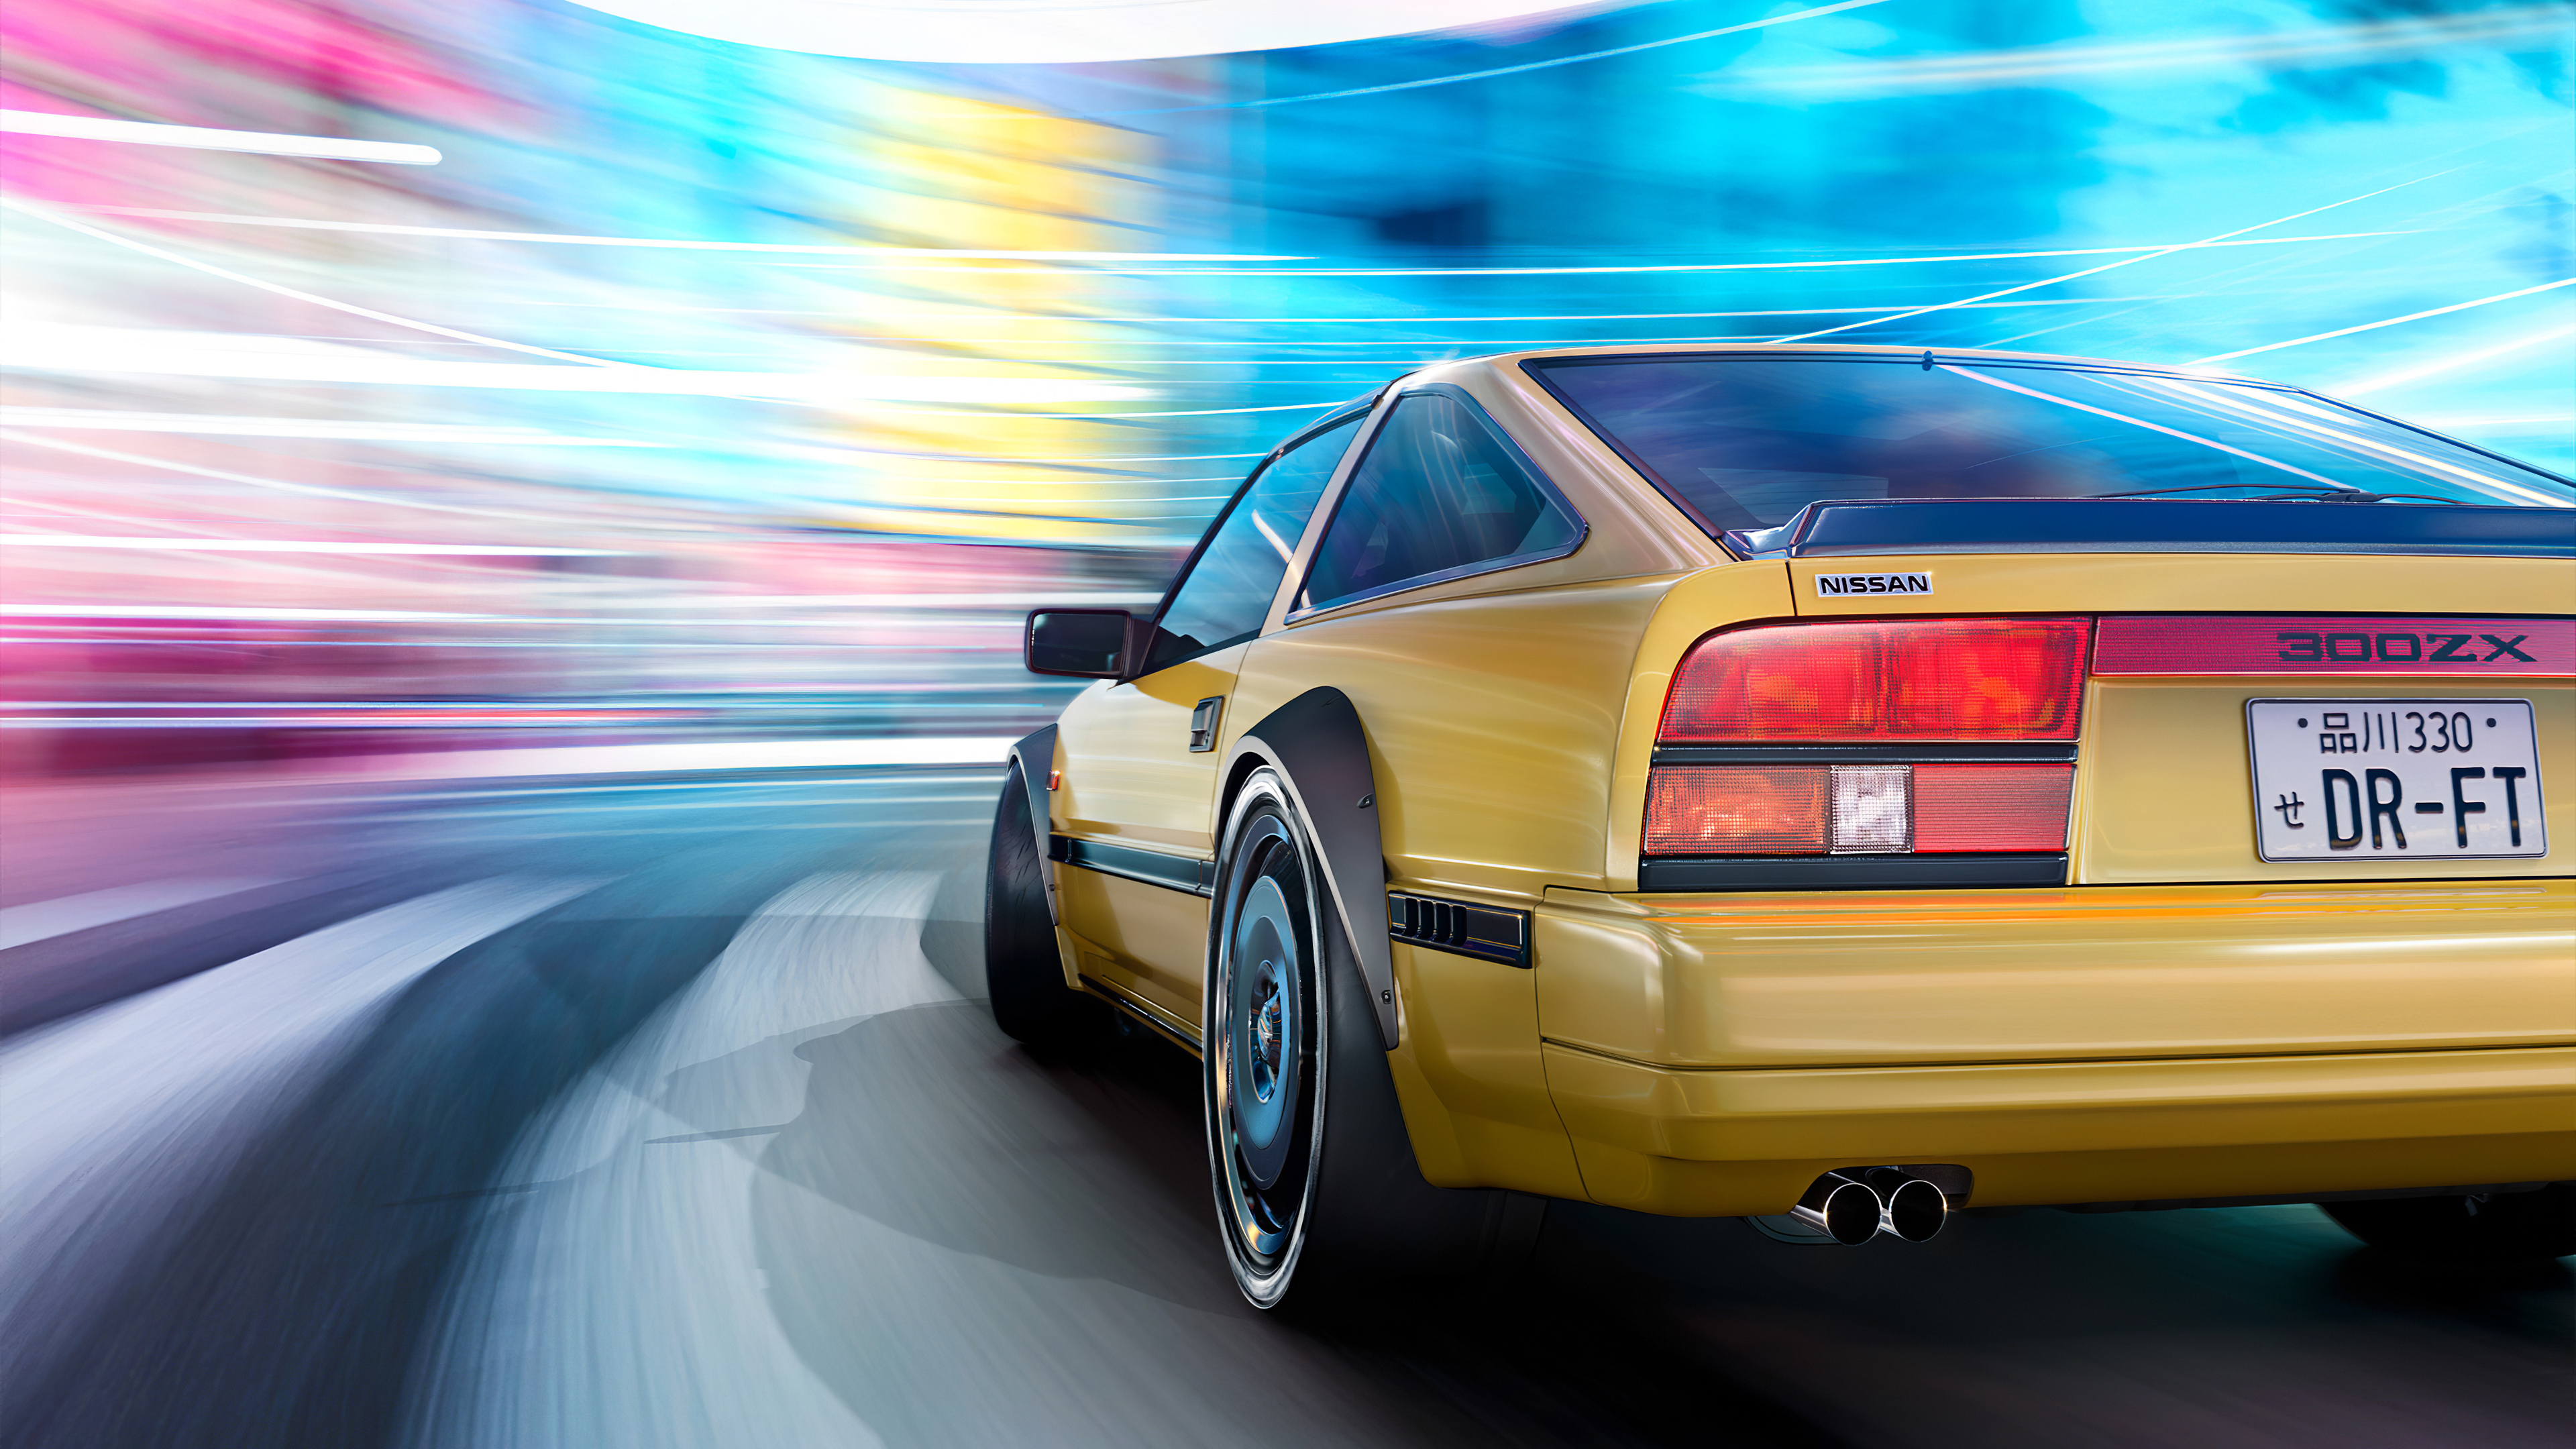 3840x2160 Nissan 300 Zx In Motion Blur 4k, HD Cars, 4k Wallpapers, Images, Backgrounds, Photos and Pictures